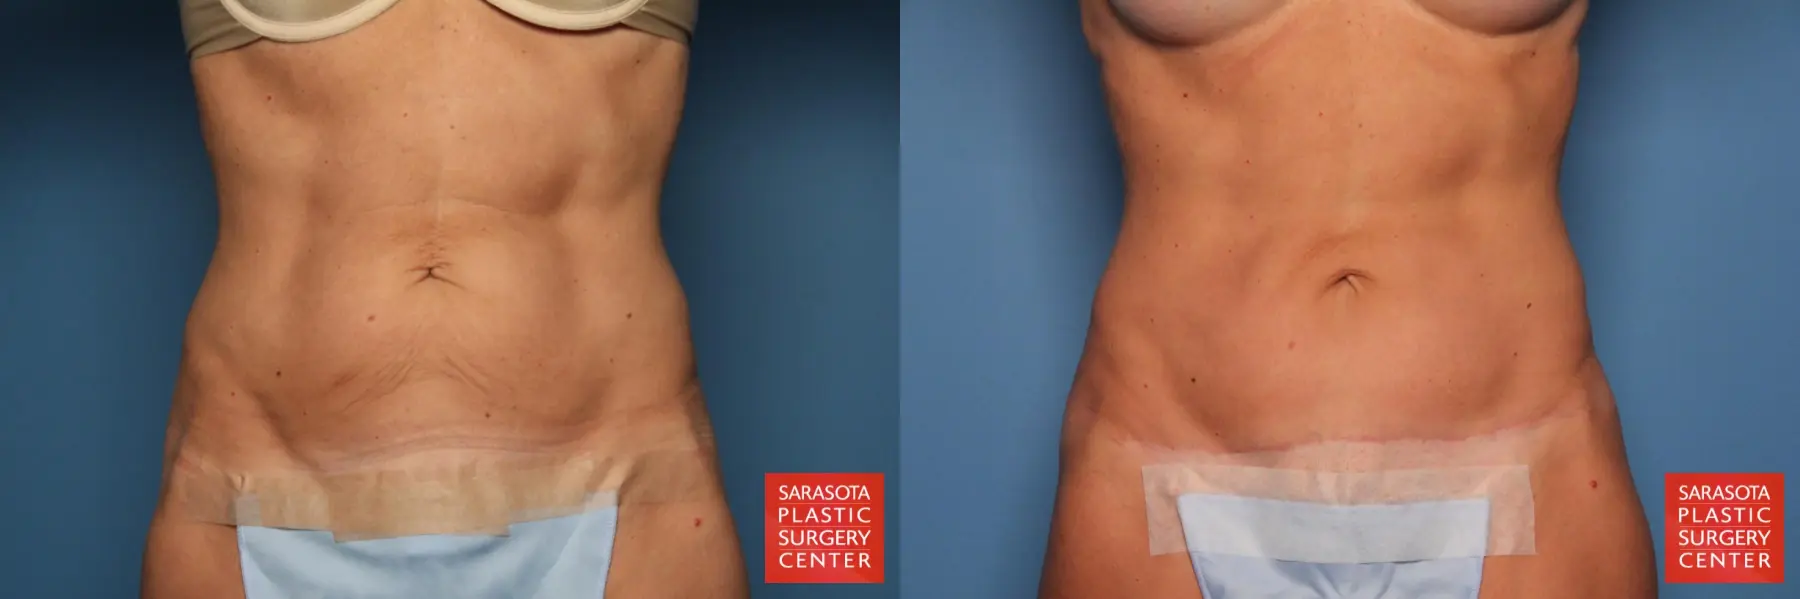 Mini Tummy Tuck: Patient 2 - Before and After  